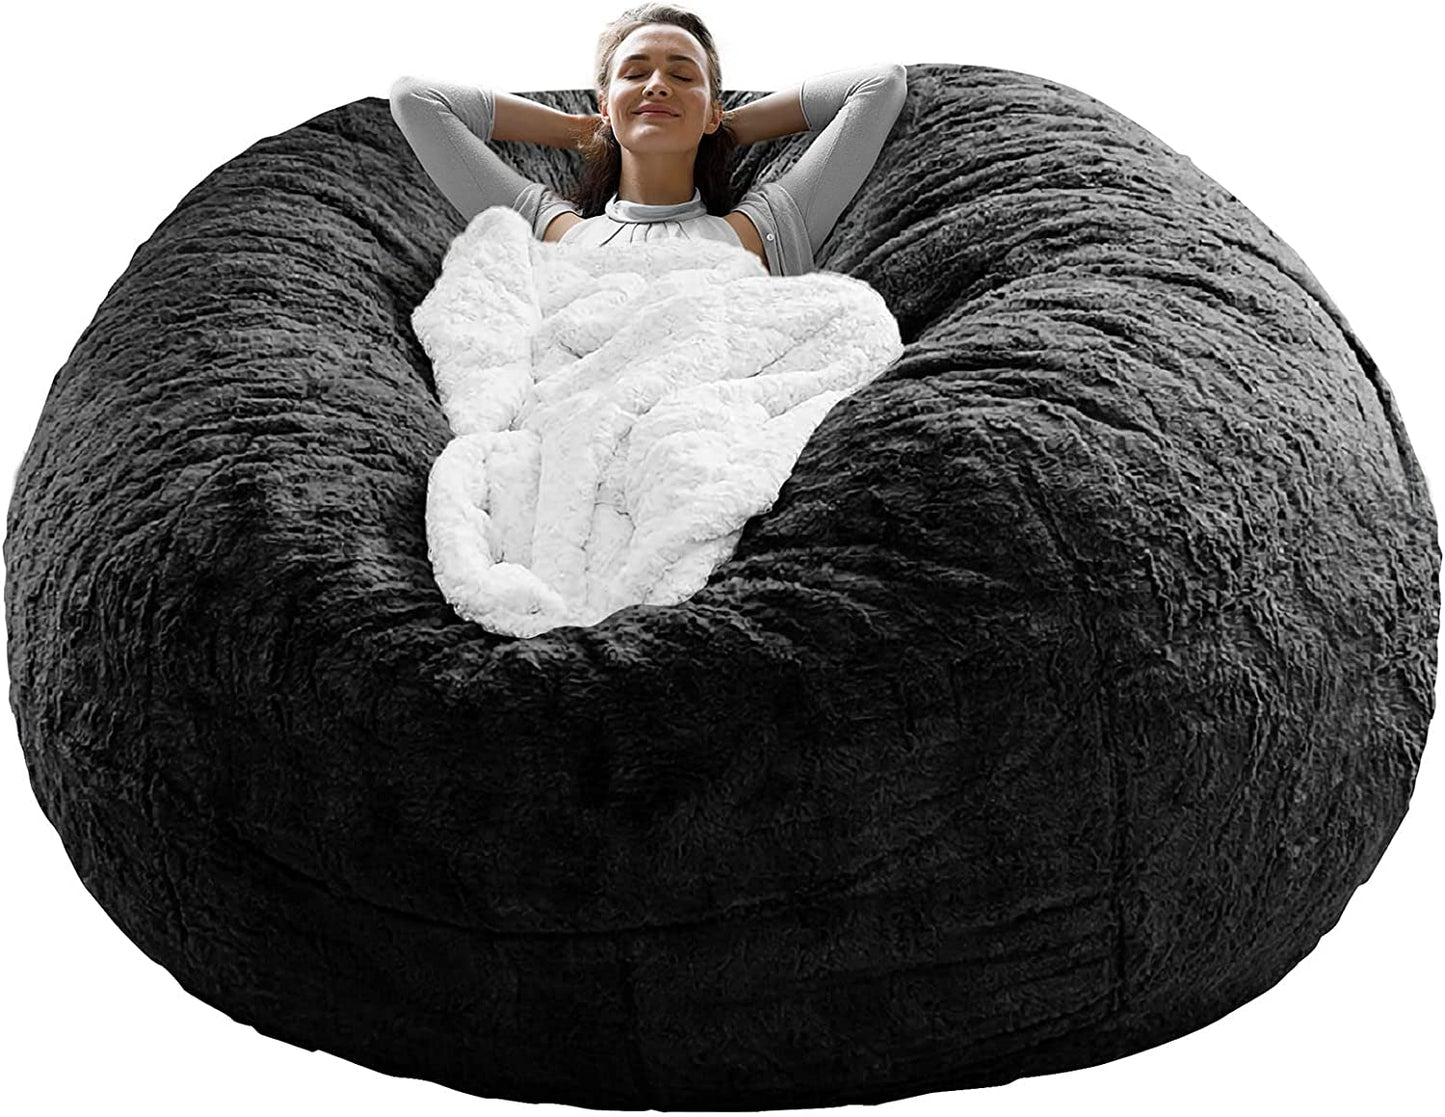 5ft Black Bean Bag Chair Cover - Plush Comfort and Versatility for Any Space